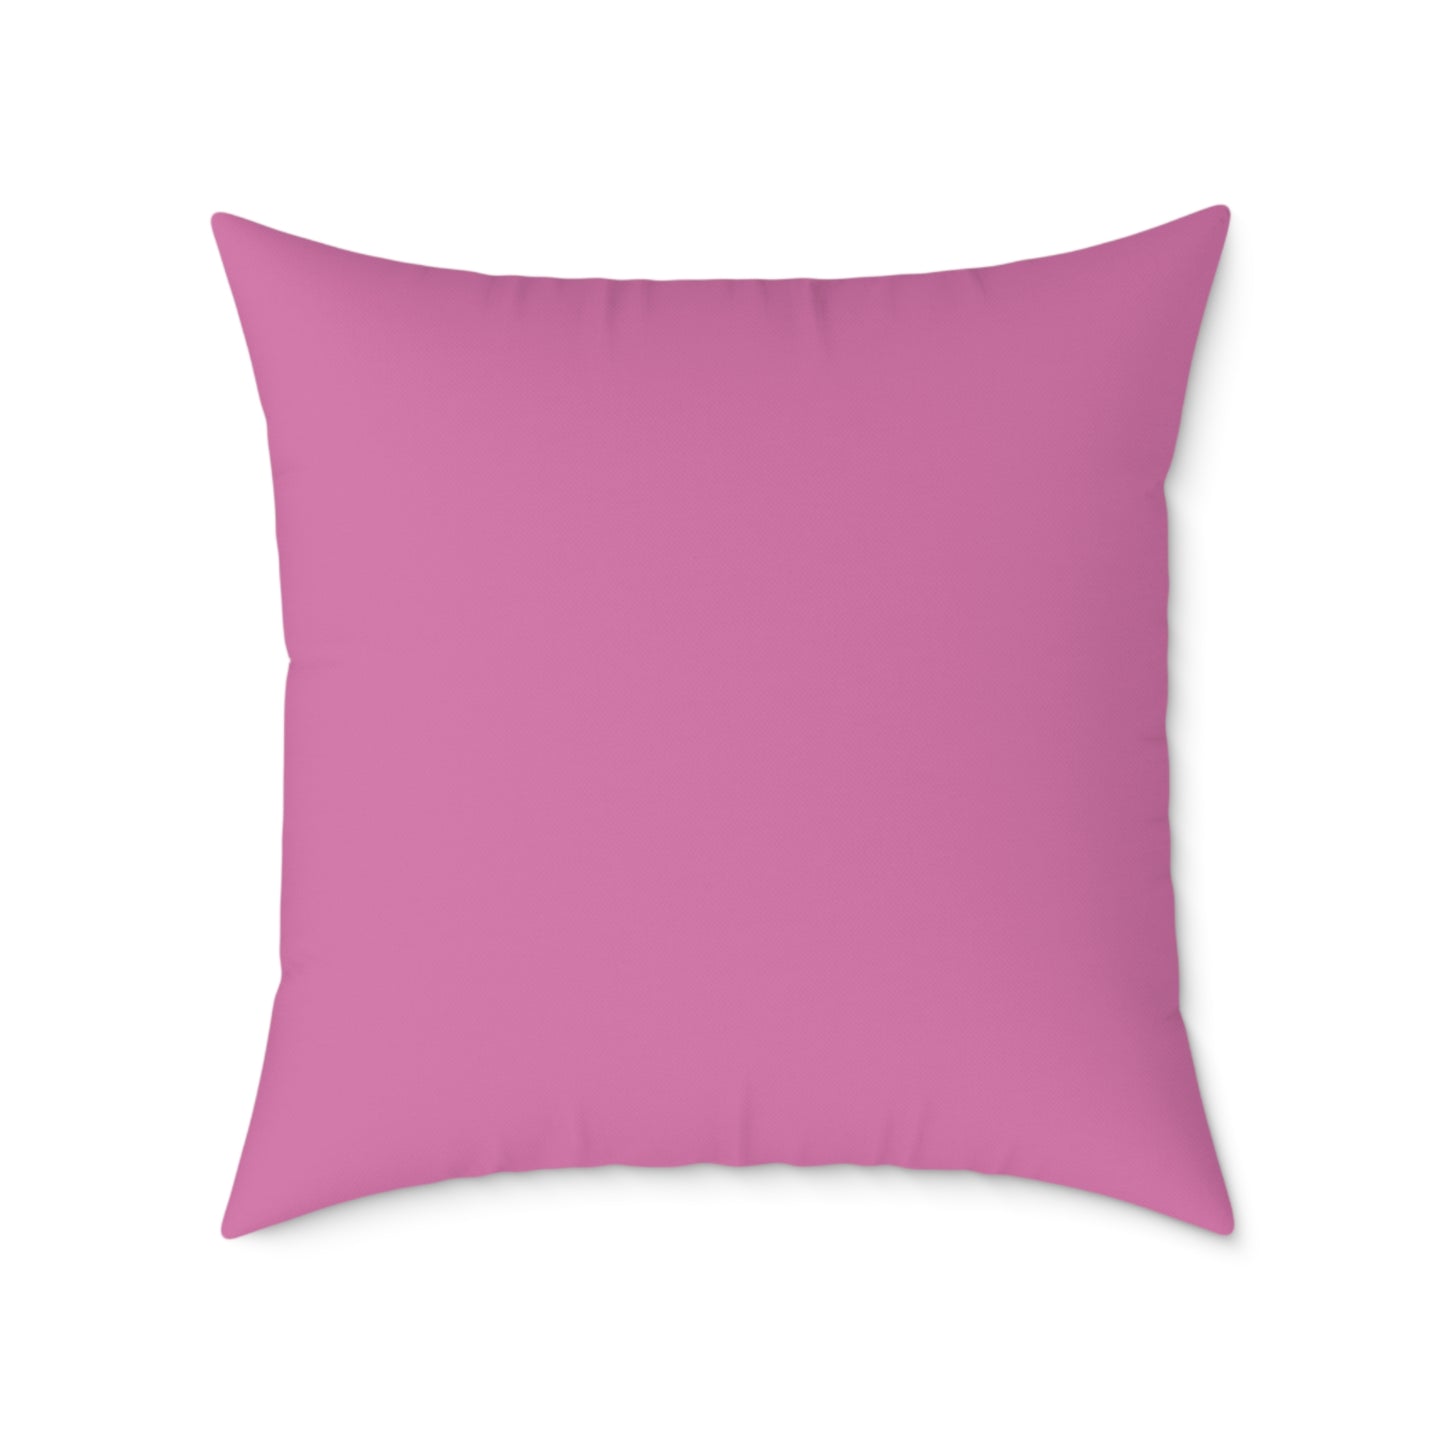 Jane Austen "Her Own Thoughts" Quote Cushion